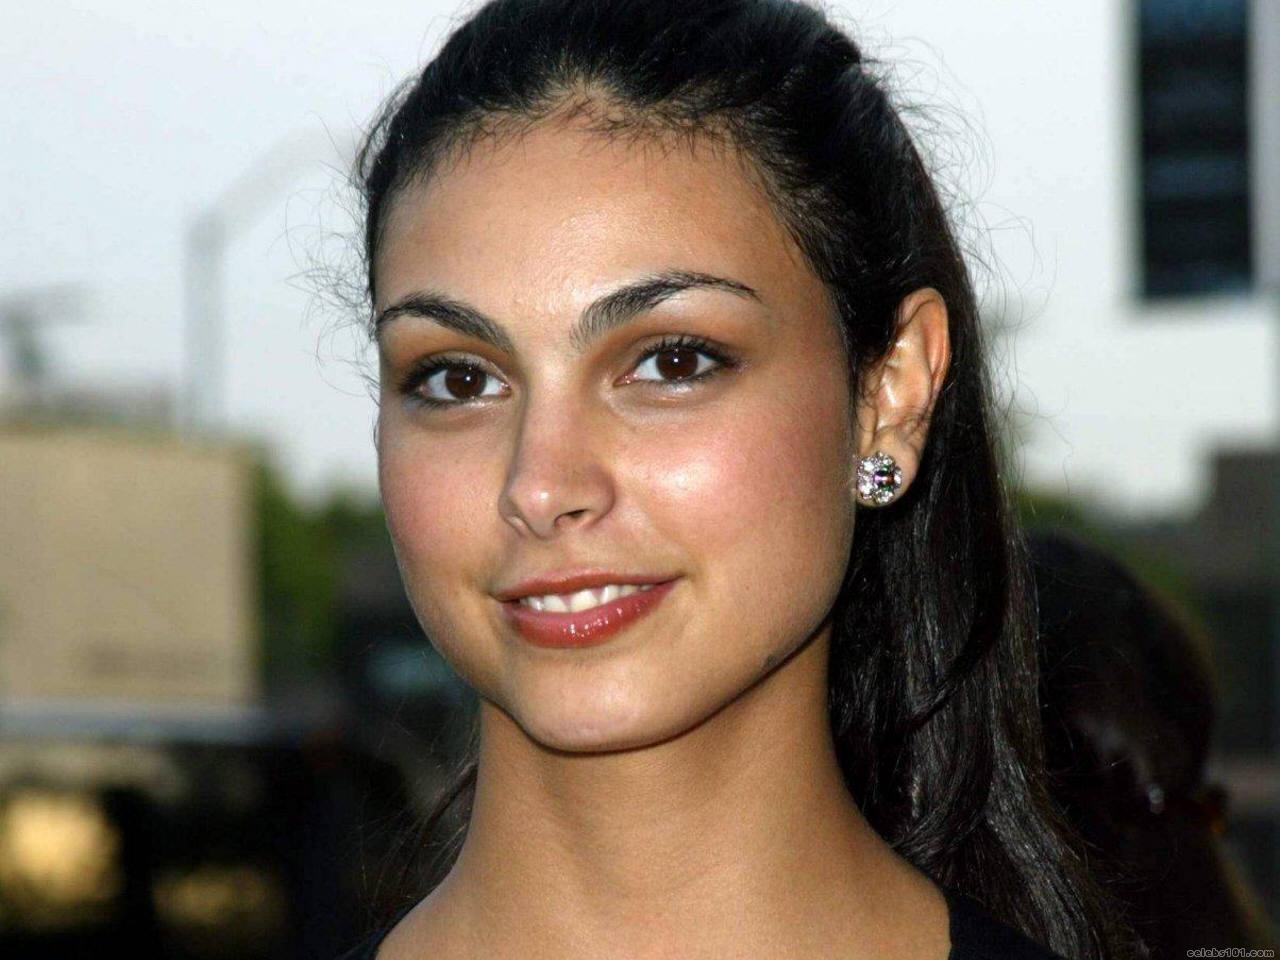 Morena Baccarin High quality wallpaper size 1280x960 of Morena Baccarin ...